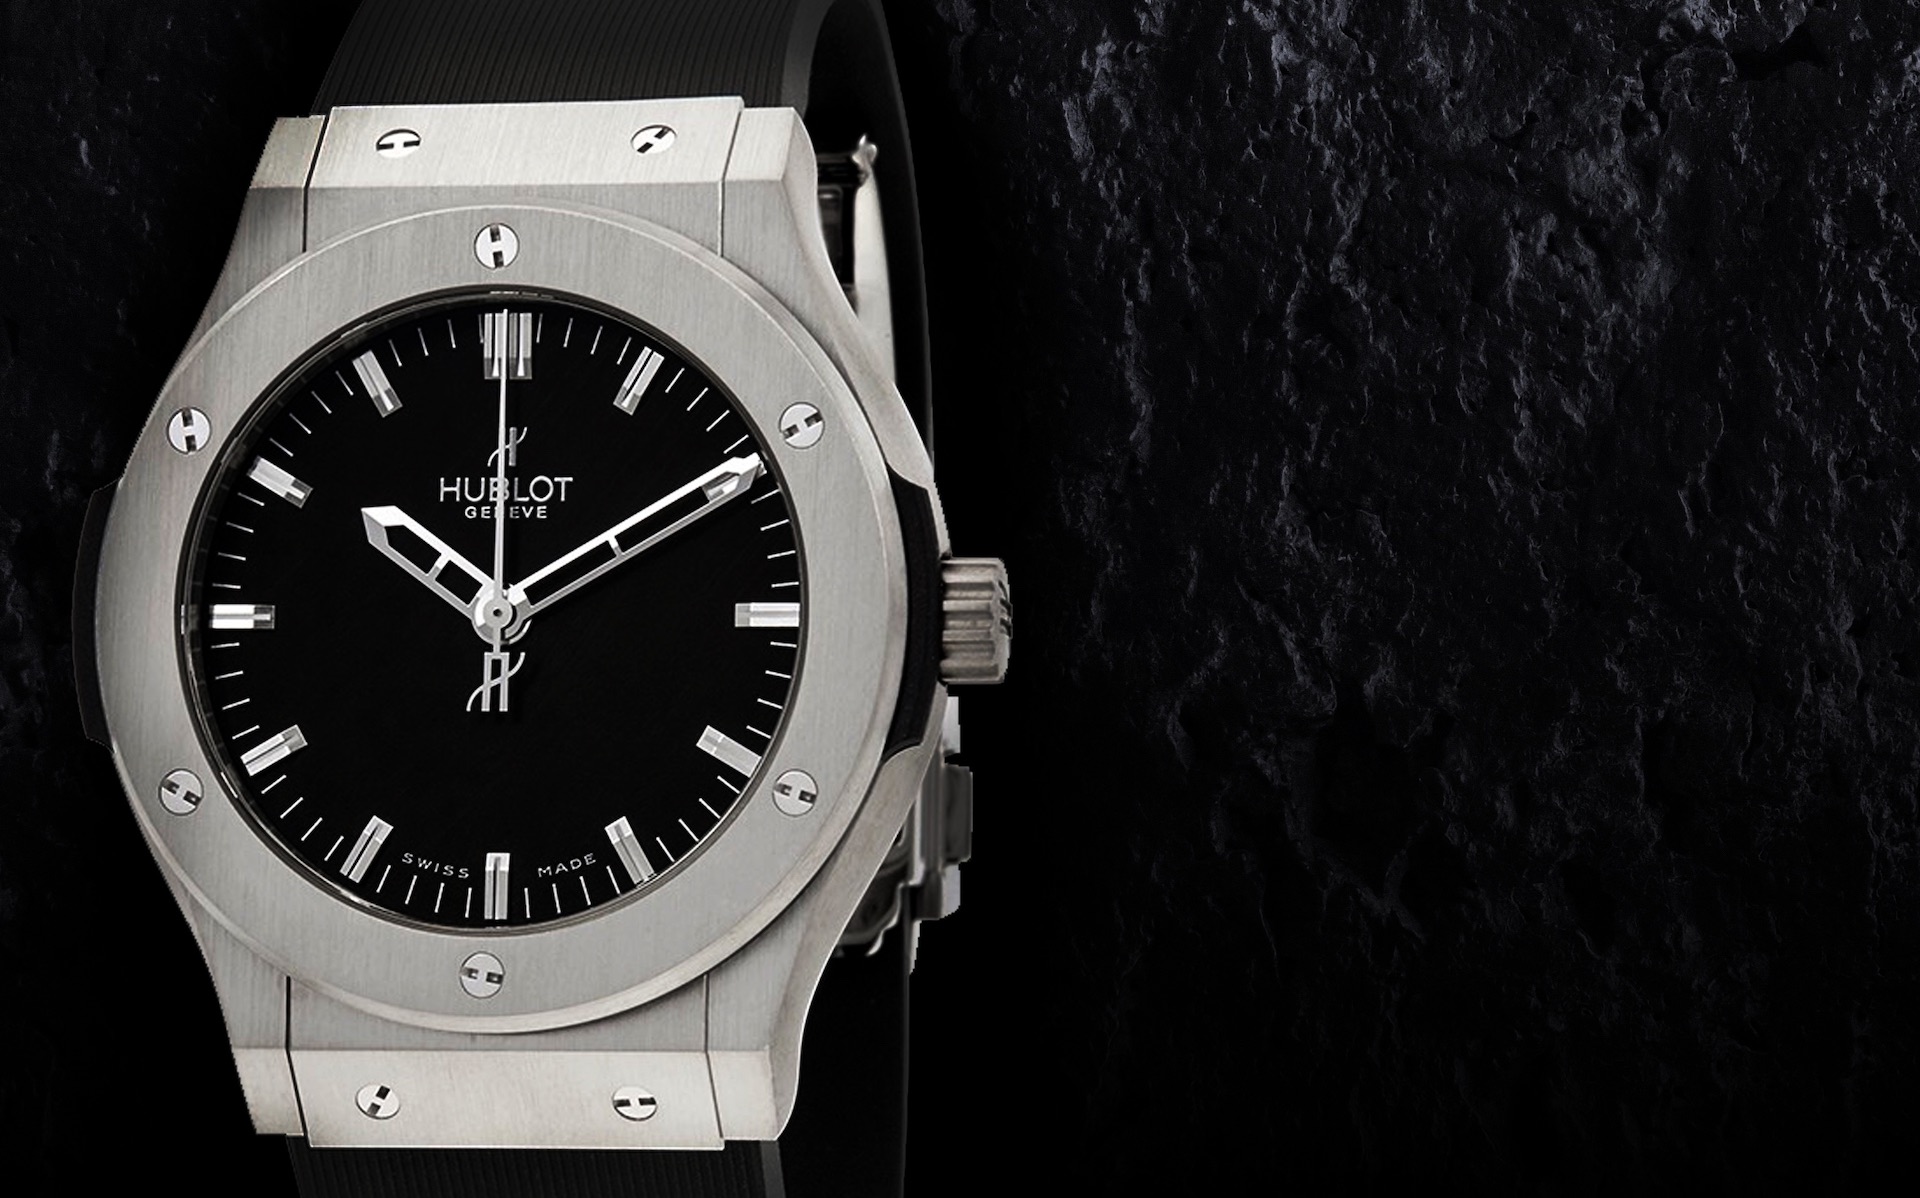 Introducing YourWatch.com With A Hublot Classic Fusion Watch Giveaway